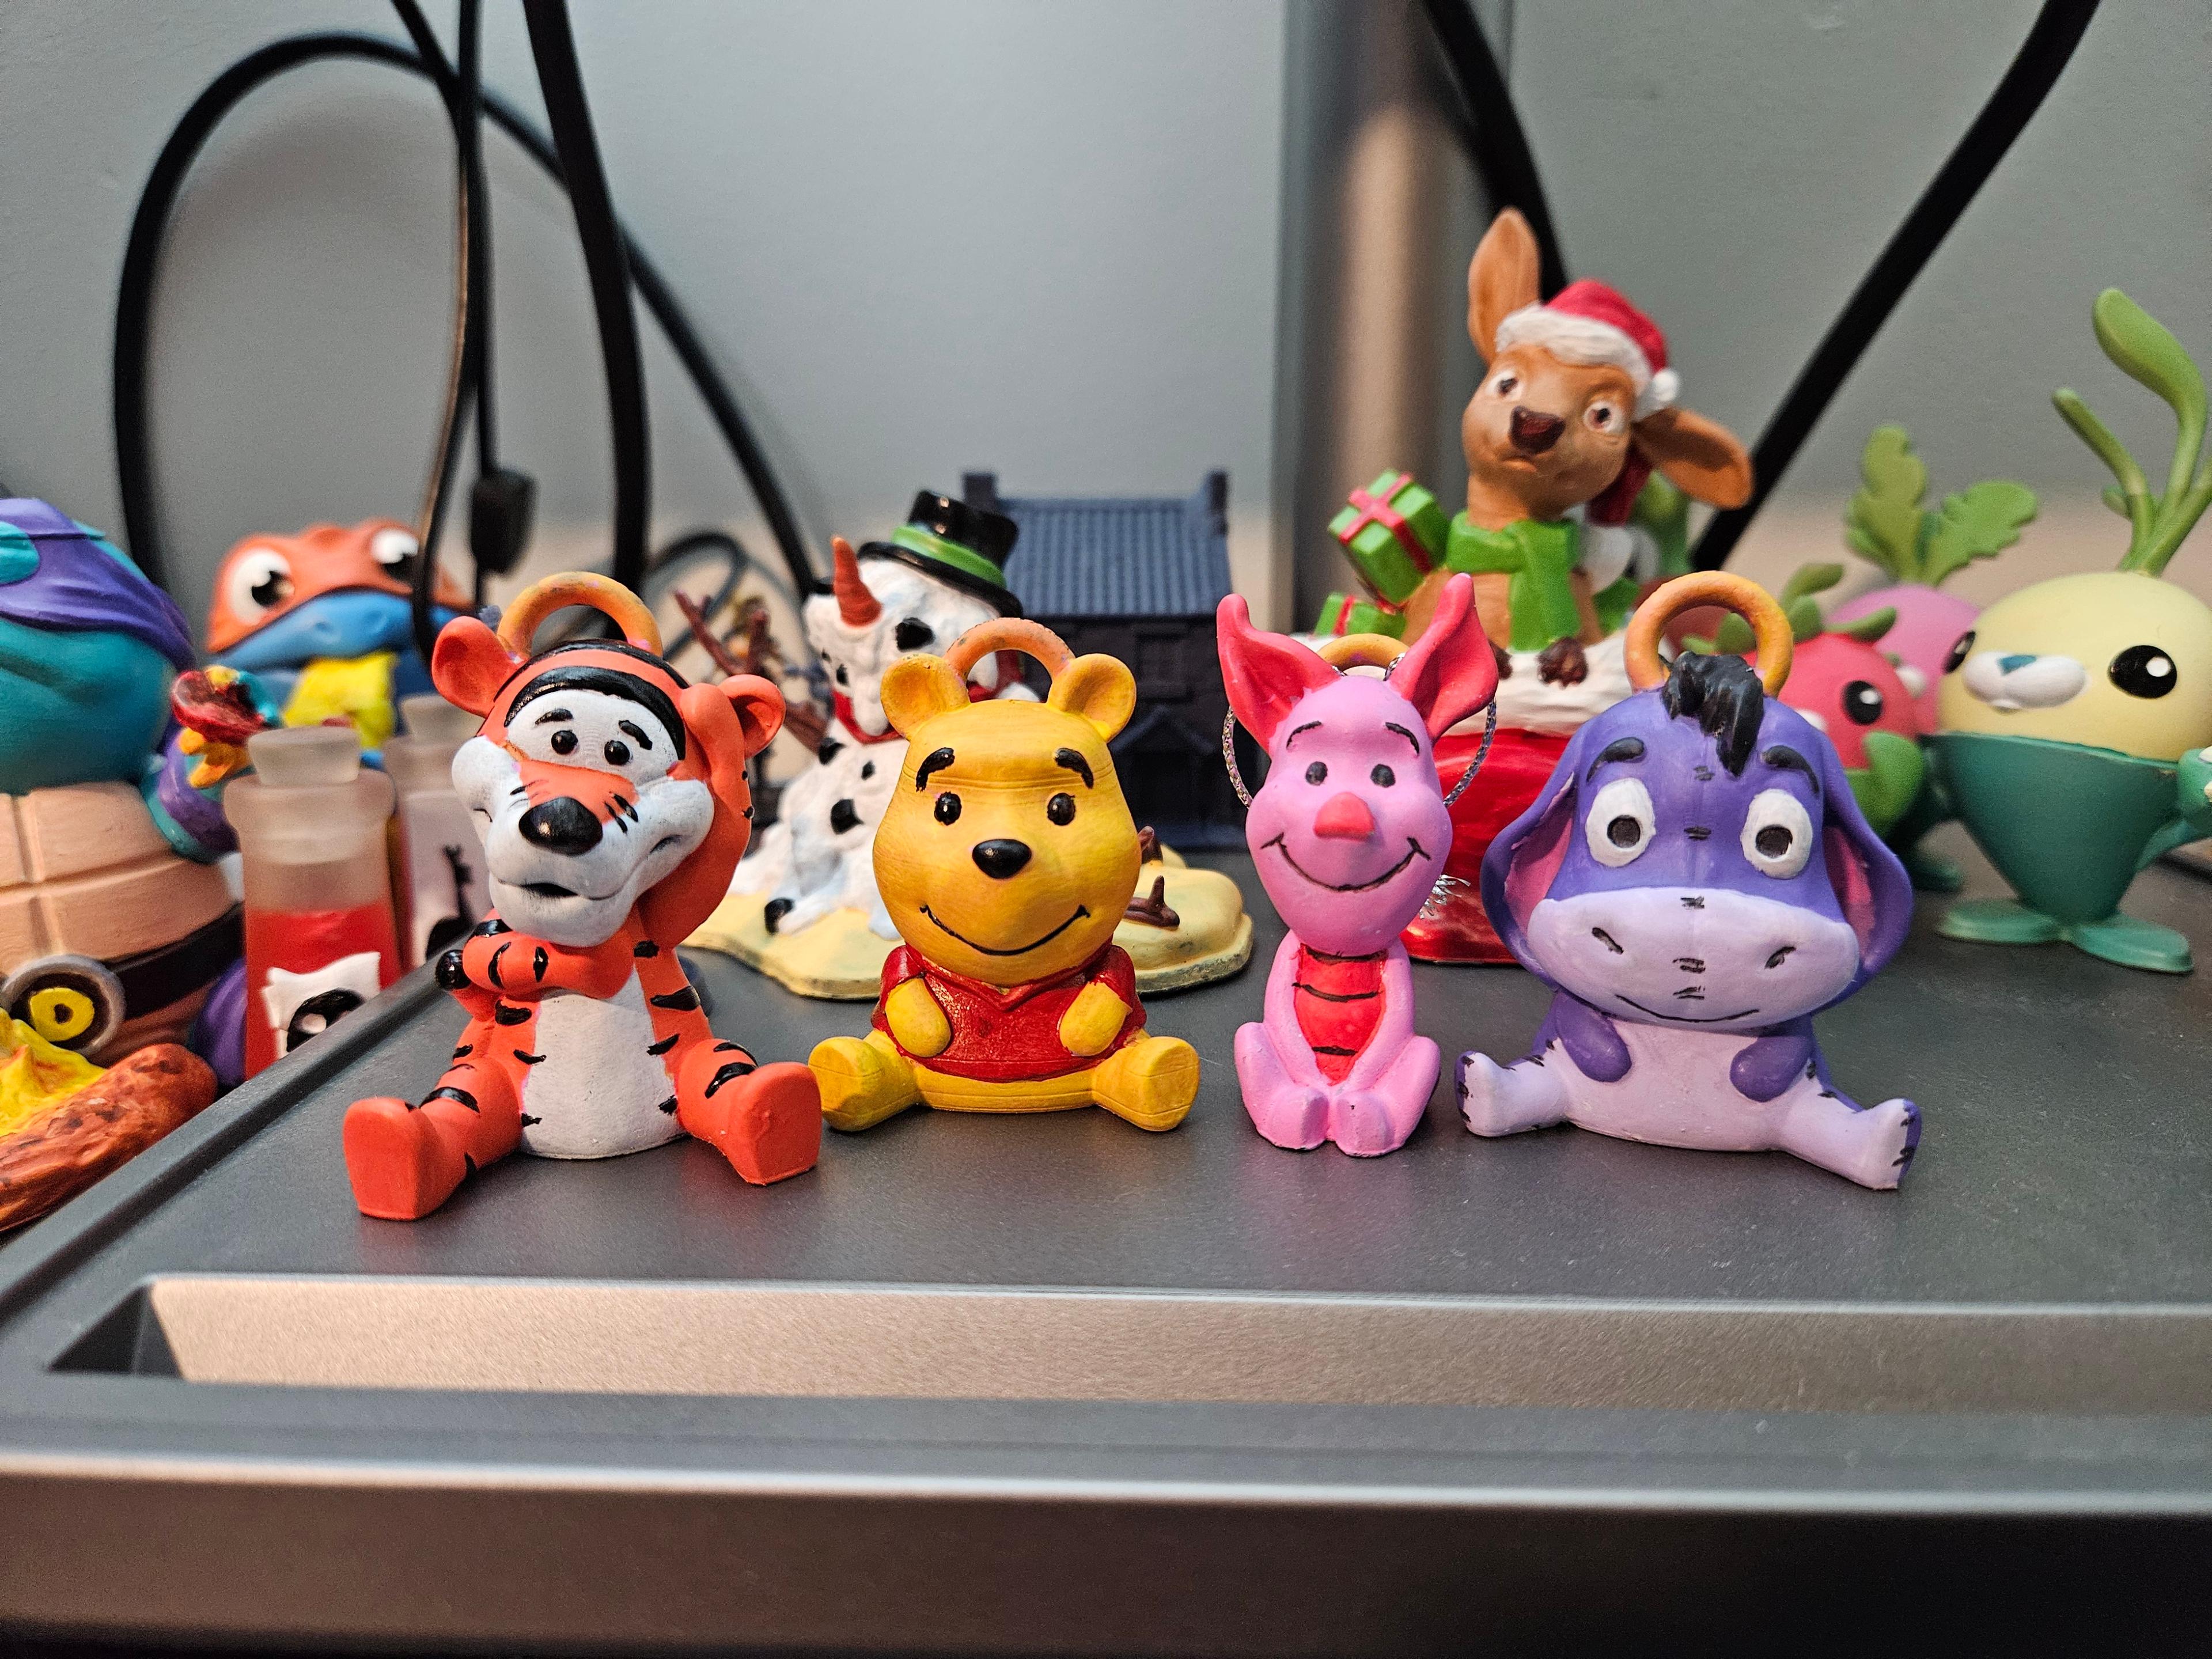 Picture of the whole gang sitting together on my computer desk. Tigger, Pooh, Piglet, Eeyore 